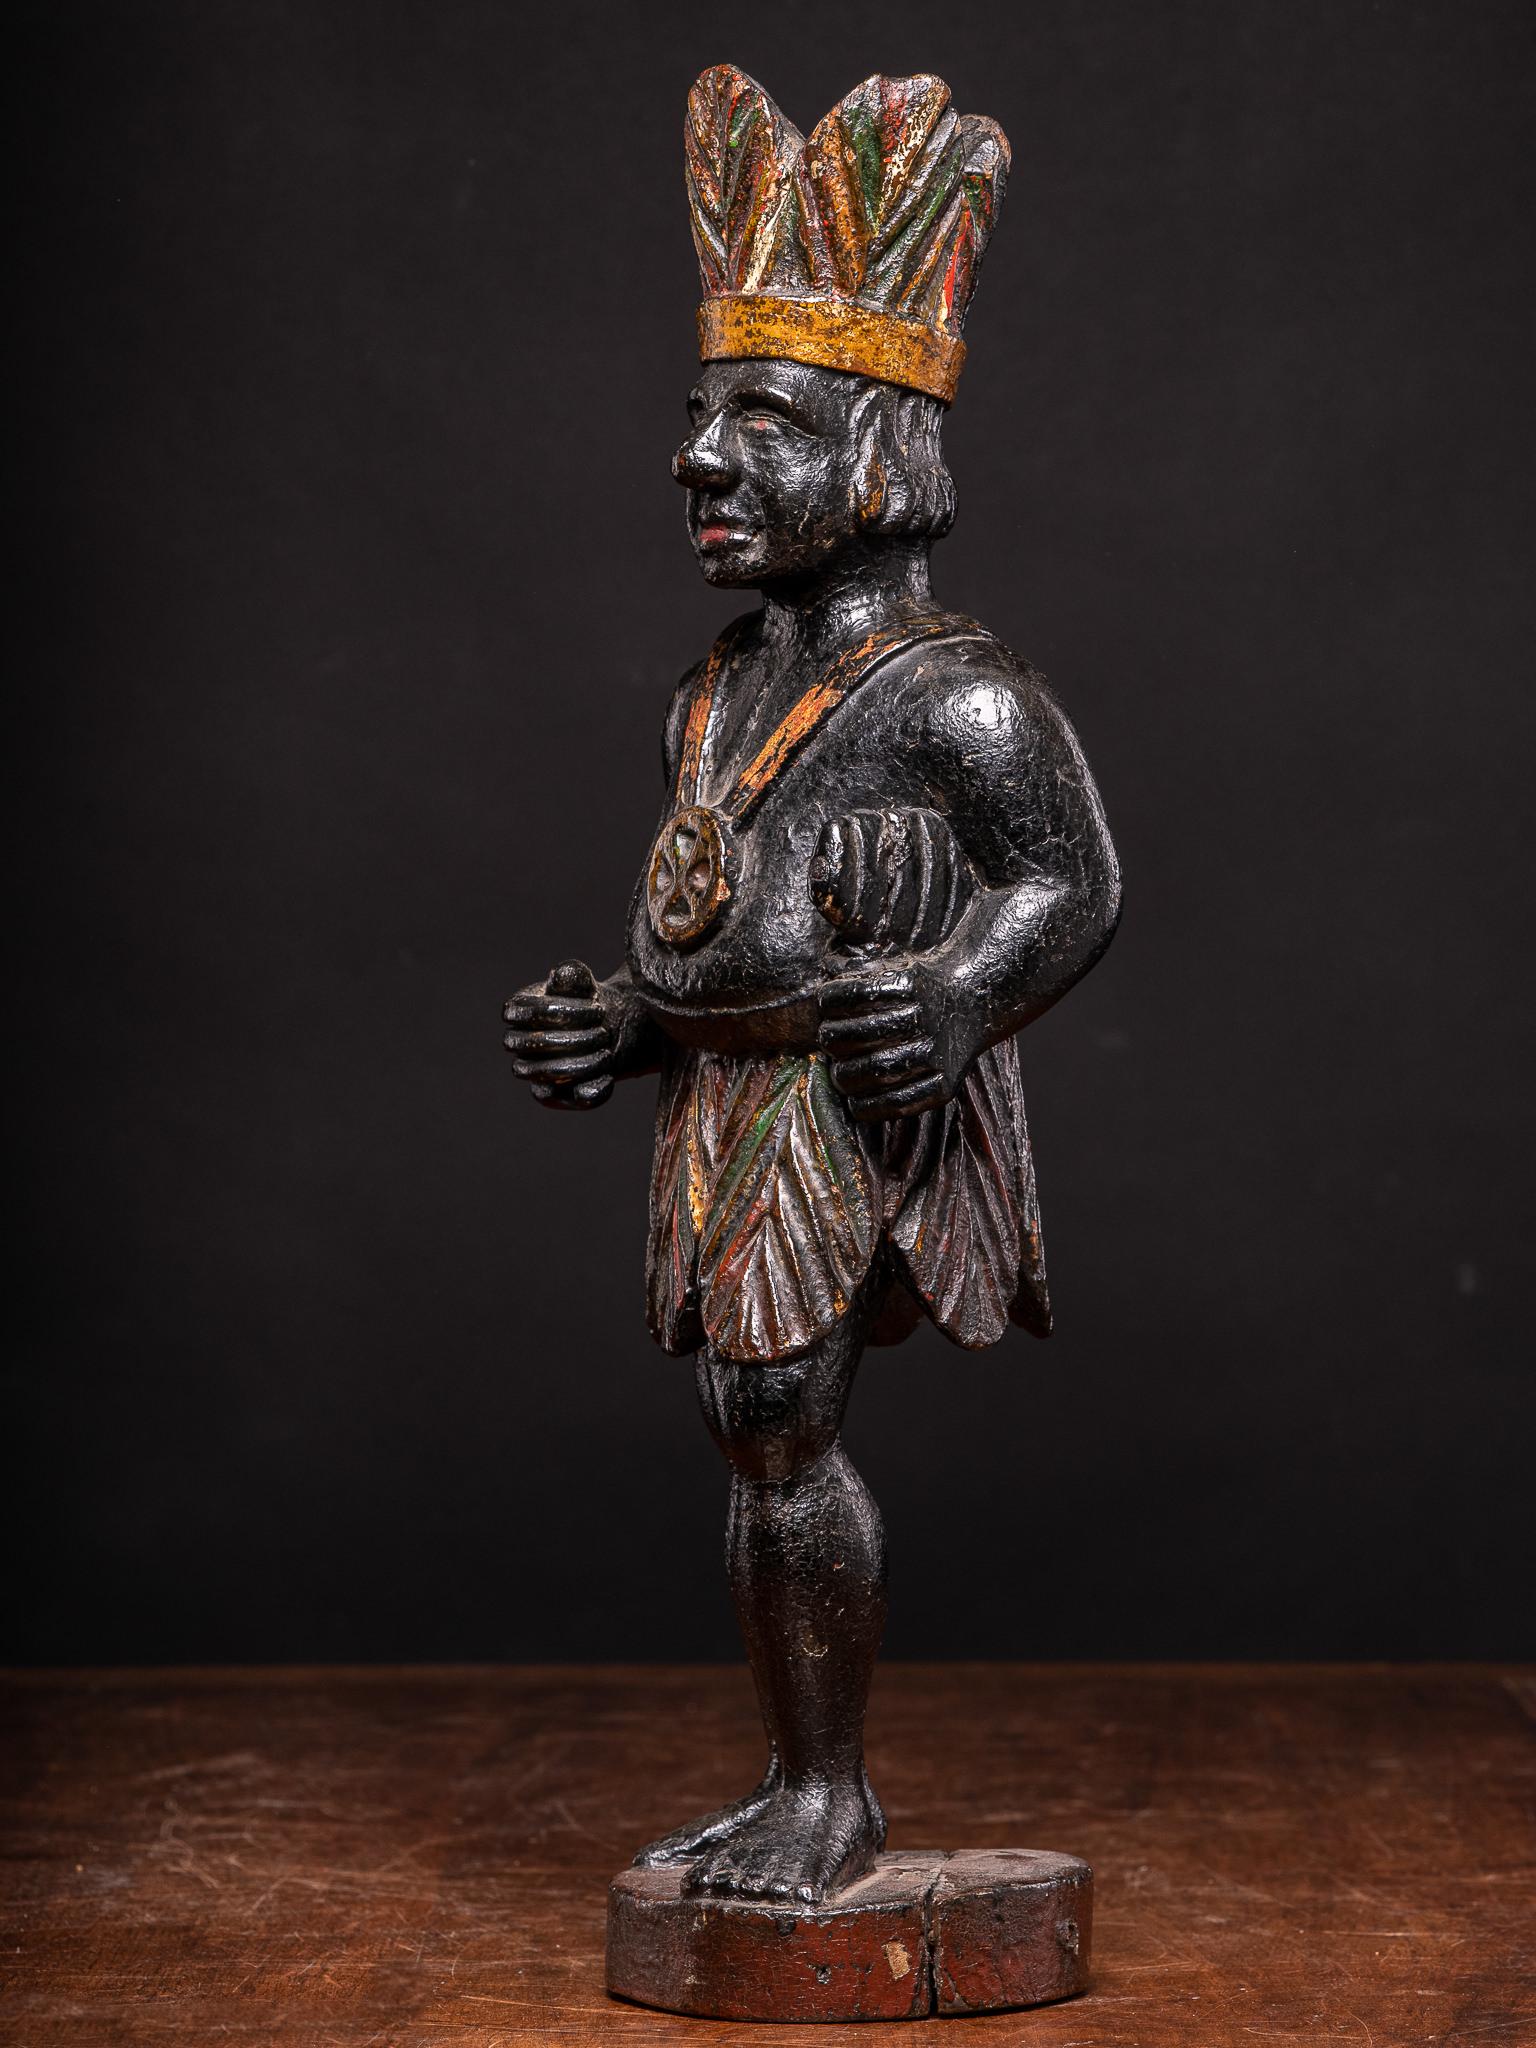 The cigar store Indian originated as a tradition, not in the United States but in Europe, where carved “Virginie men,” as Europeans called native Americans, were used for advertising the sale of tobacco, an American crop. 

Tobacconists in America